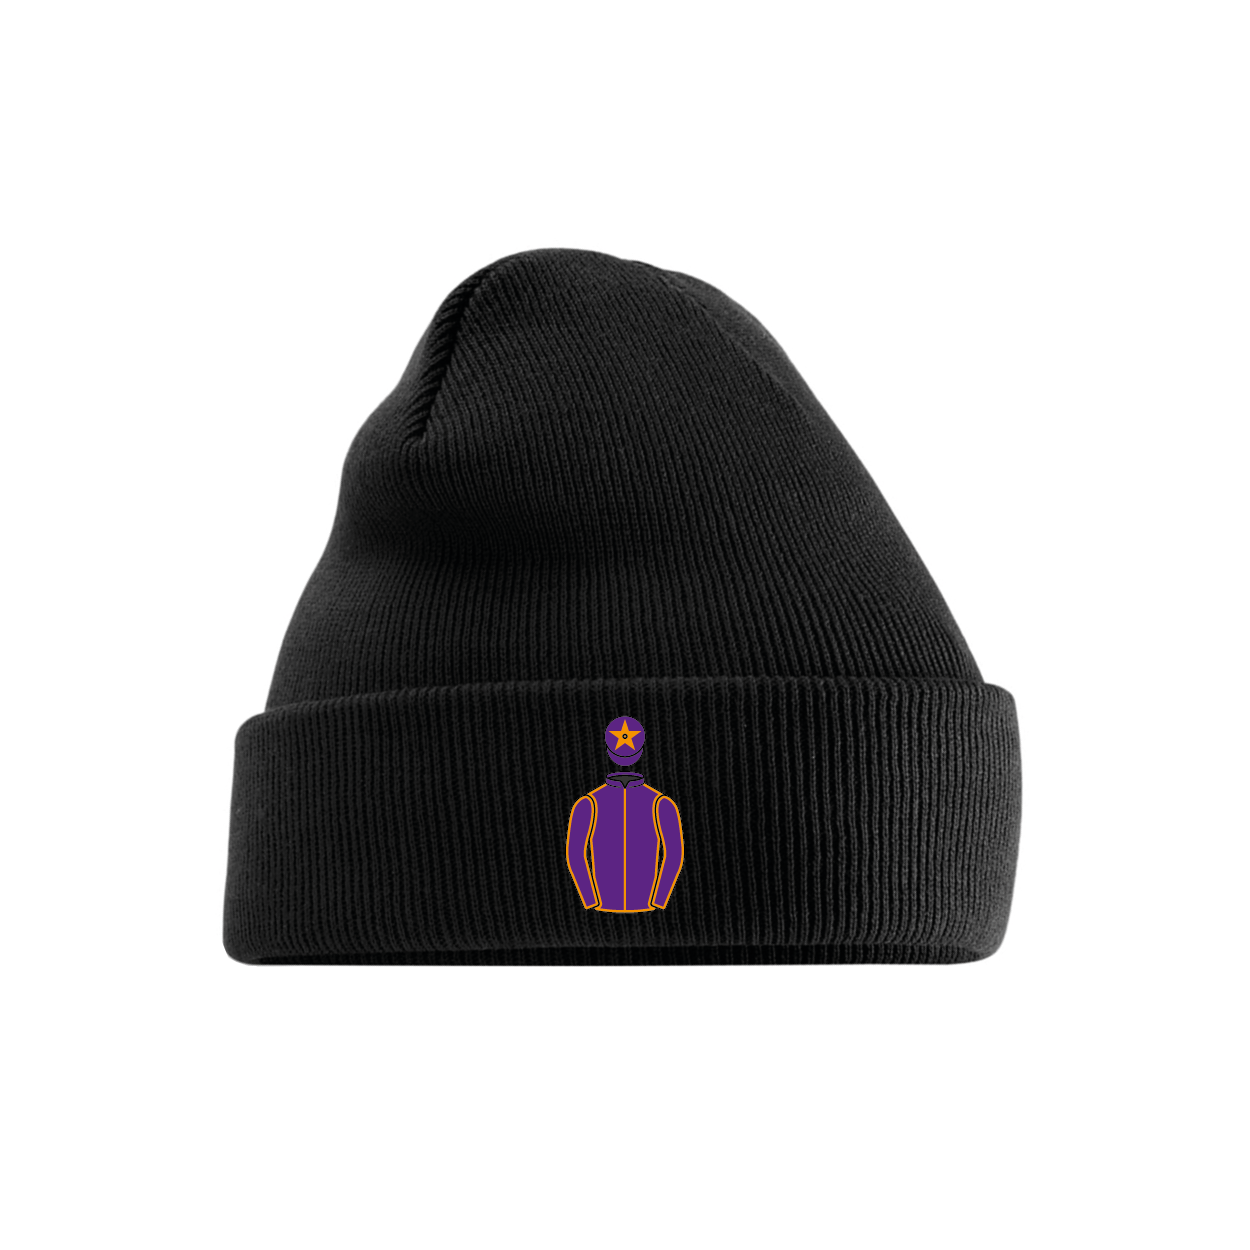 Wicklow Bloodstock (Ireland) Embroidered Cuffed Beanie - Hacked Up